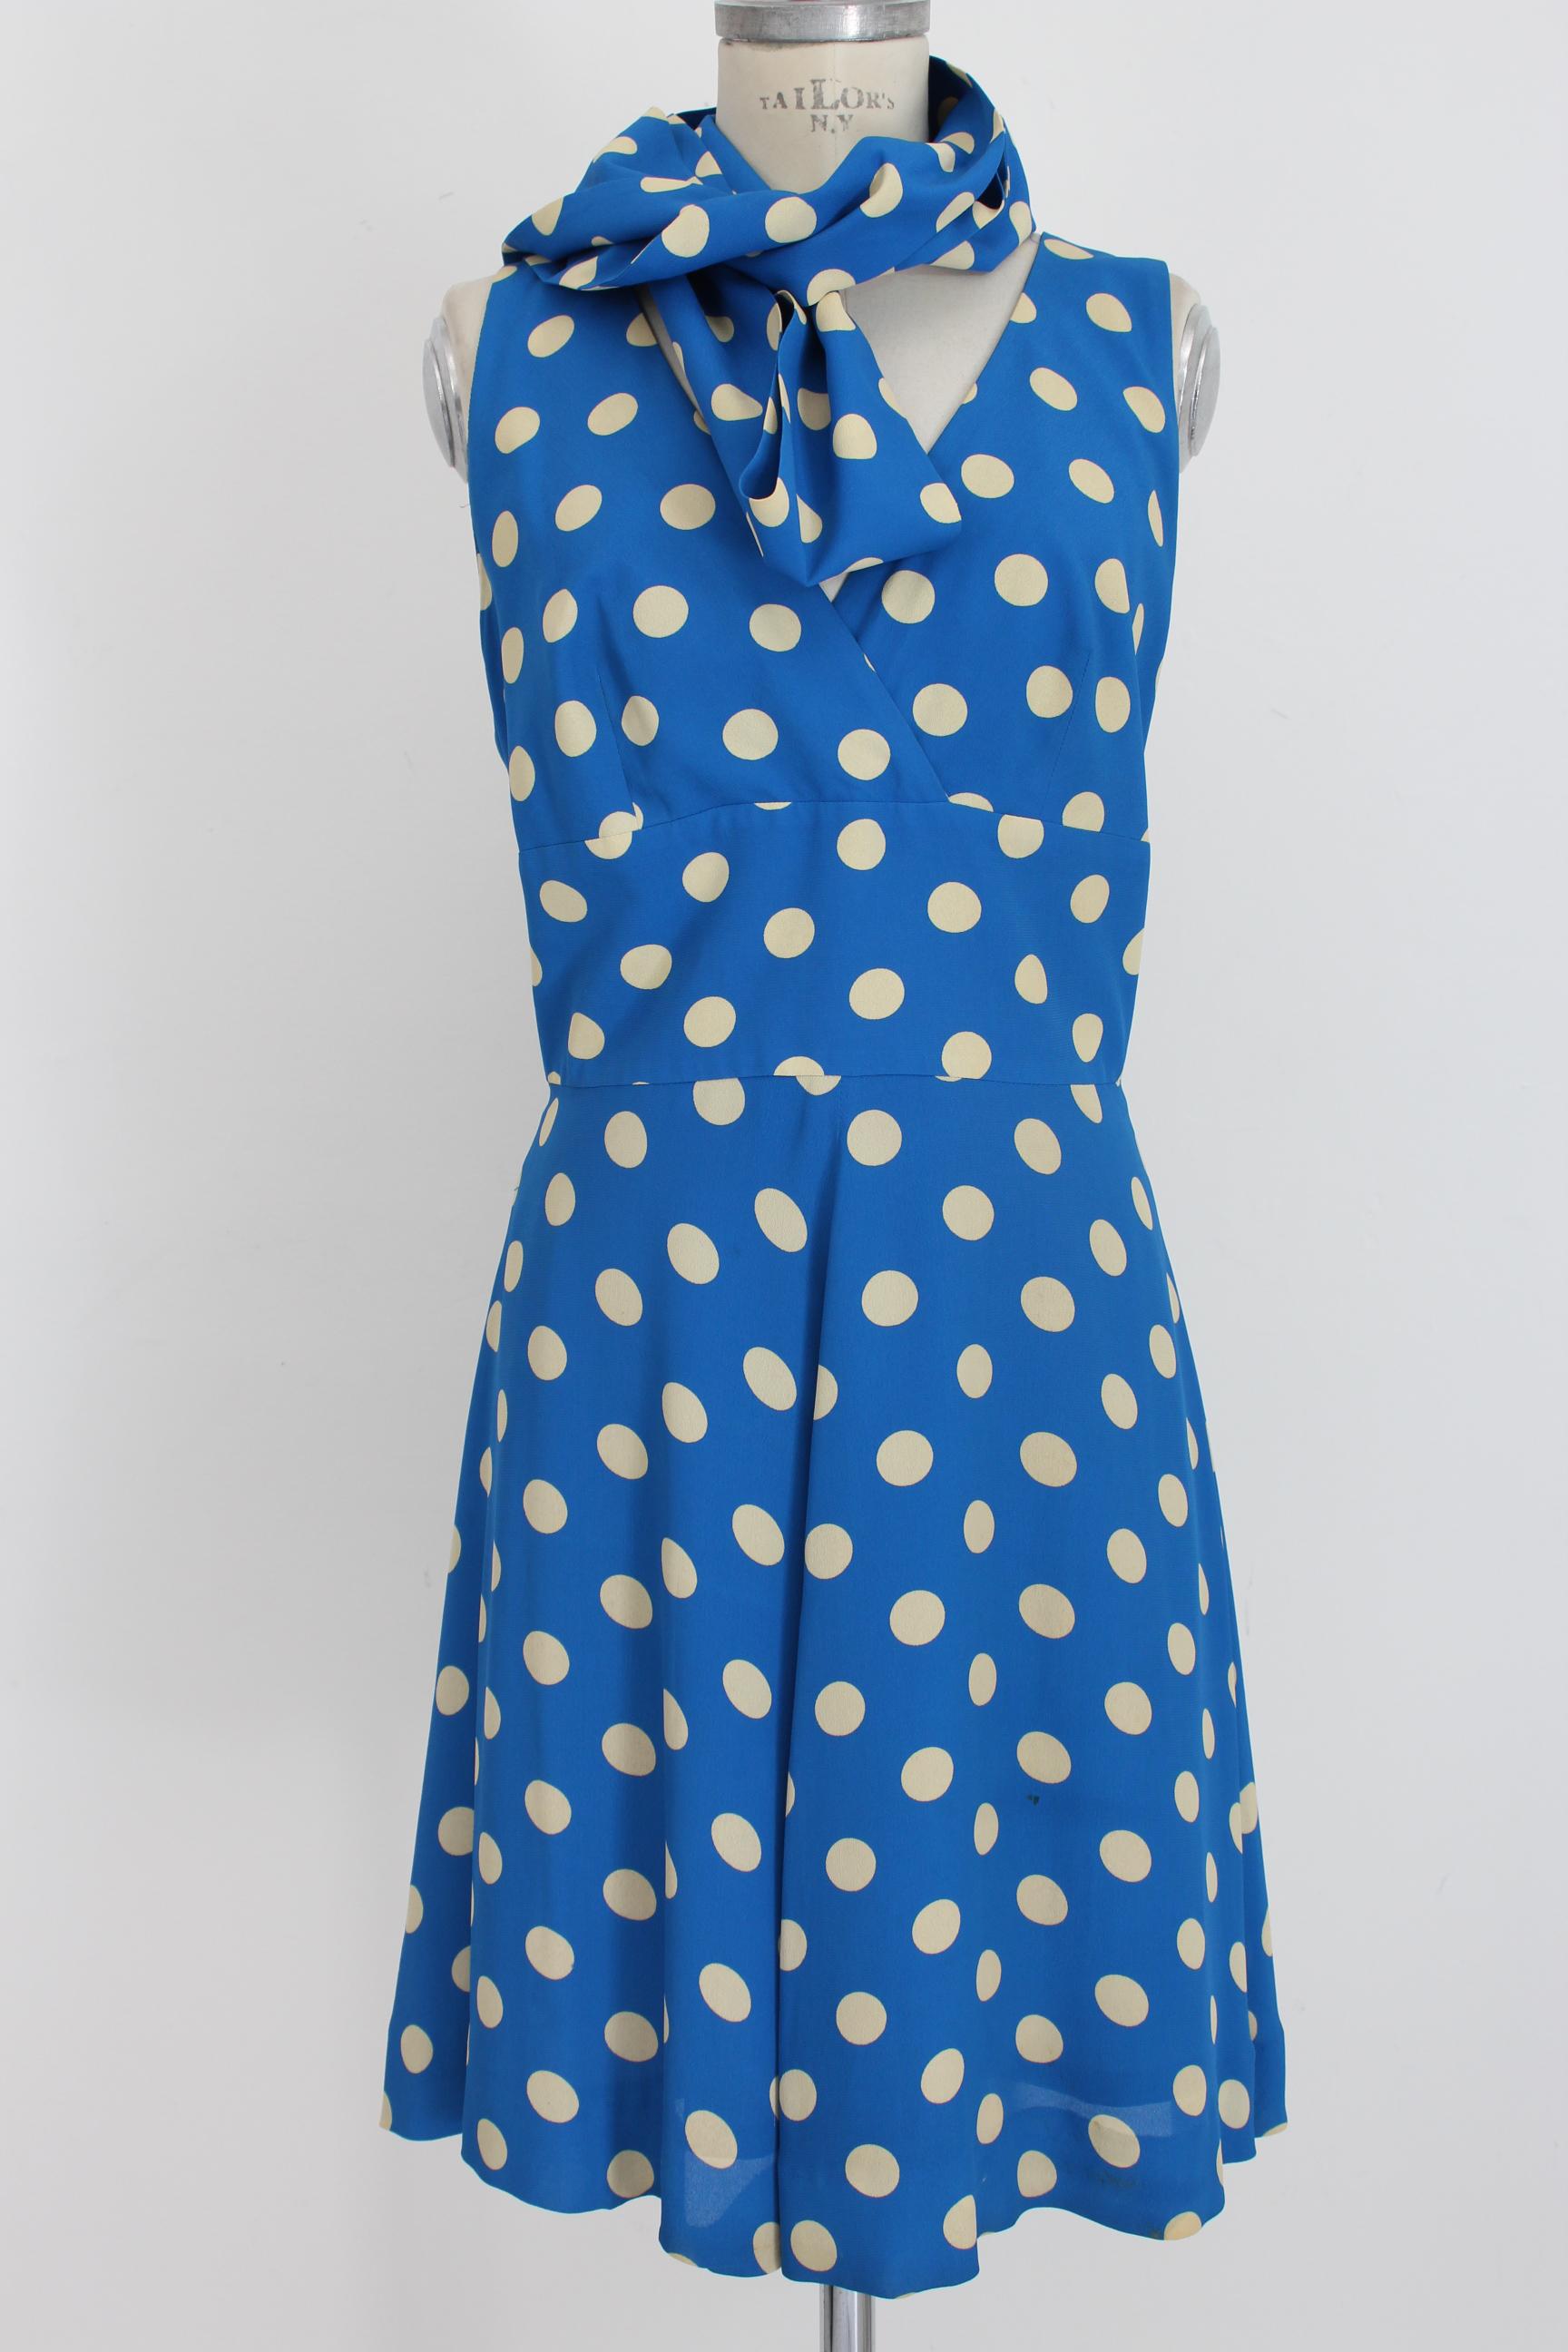 Women's Givenchy Boutique Blue White Silk Polka Dots Rockabilly Cocktail Dress